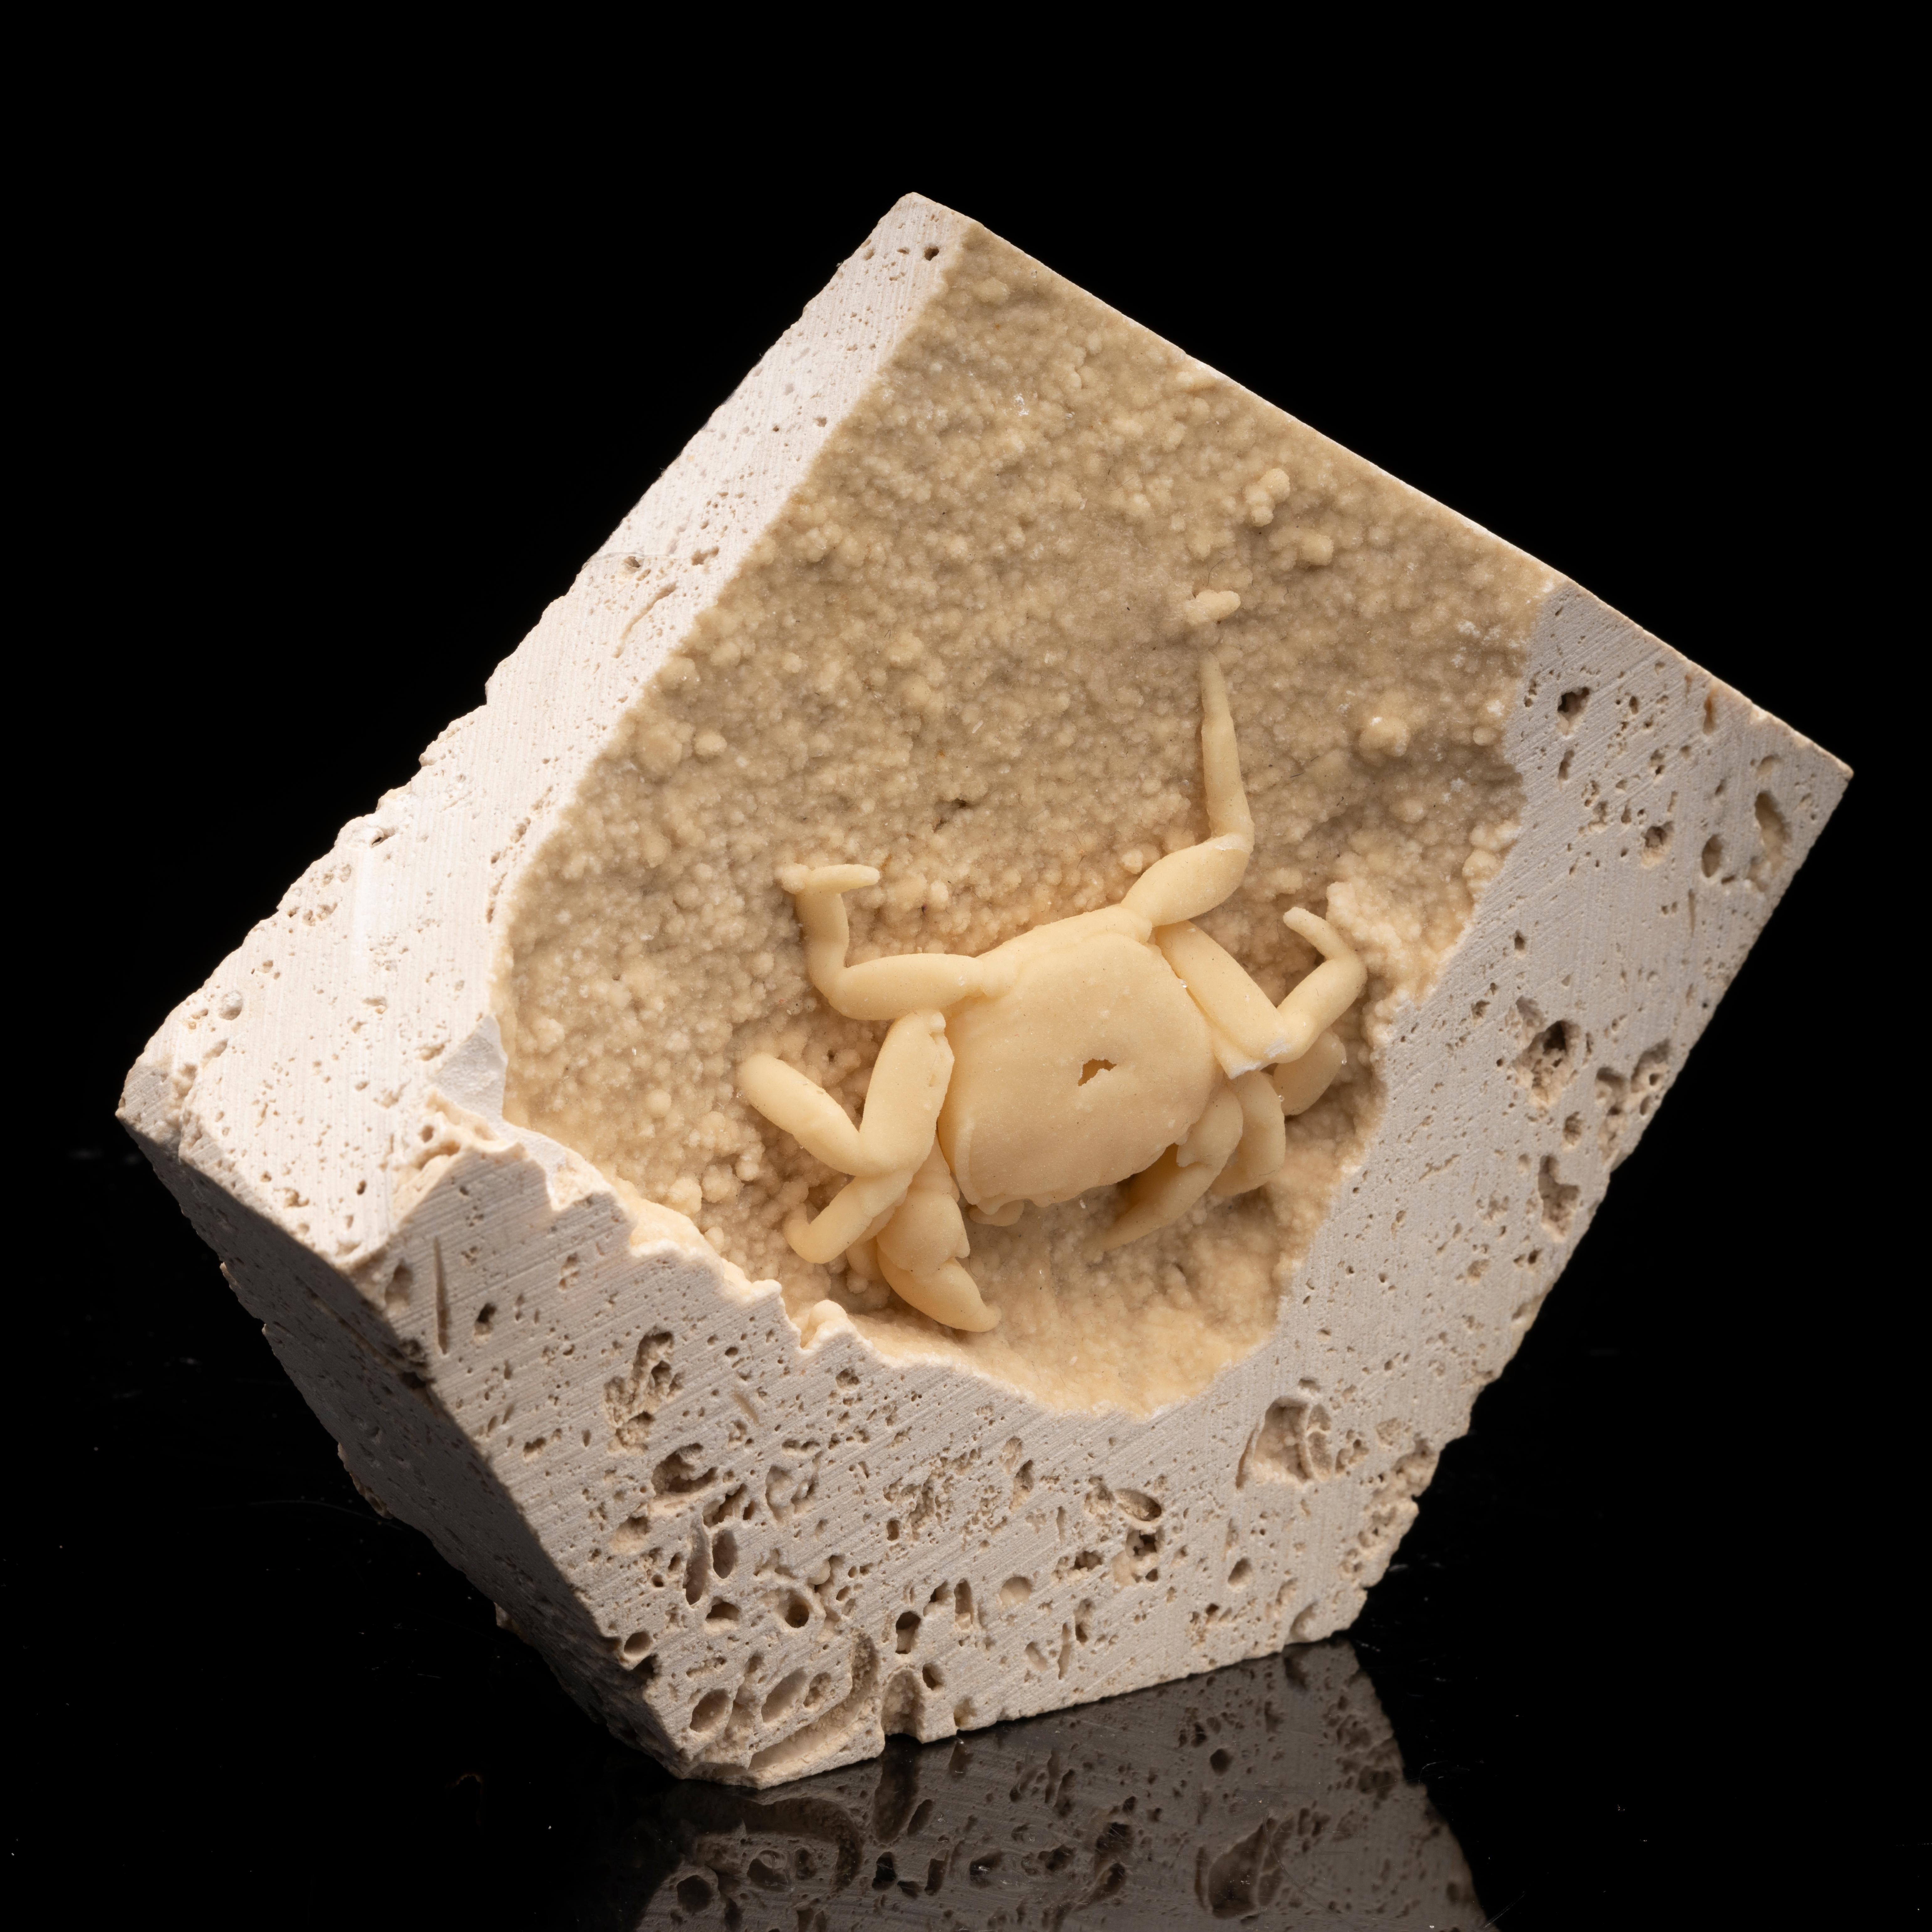 This uniquely well preserved 3D Potamon freshwater crab fossil from the Denizli Basin in Turkey is encased in white travertine, a variety of limestone often used for construction. These crabs can be discovered when the limestone is quarried. The